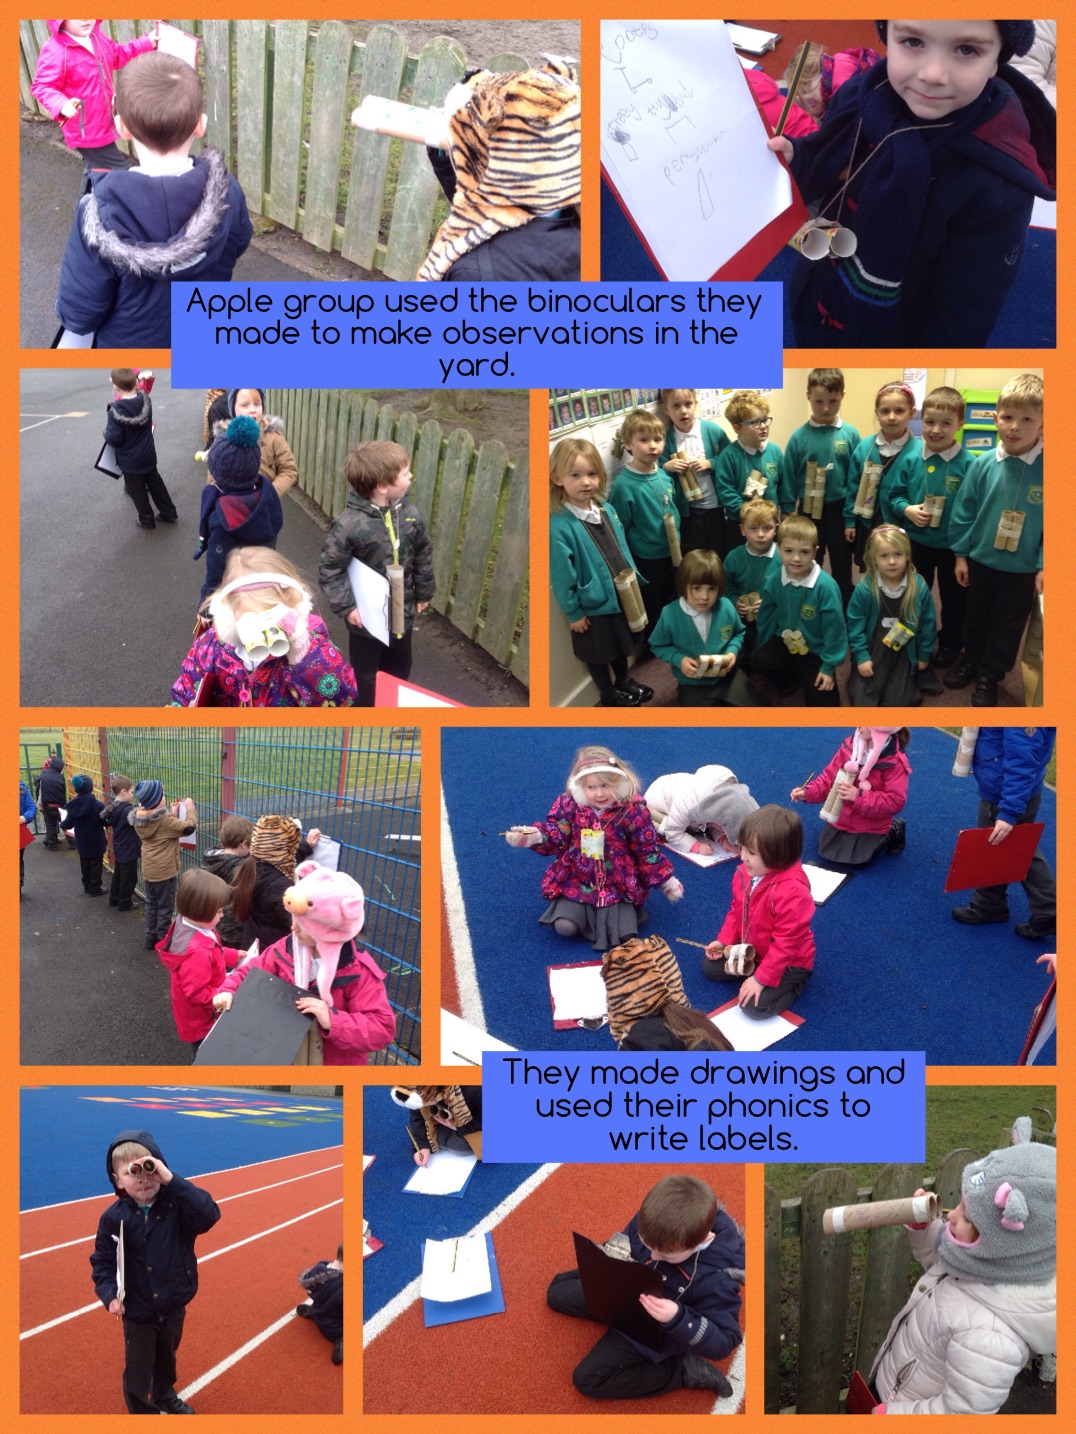 Apple group used their binoculars to make observations in the yard. #GoGreenfields #EYFS